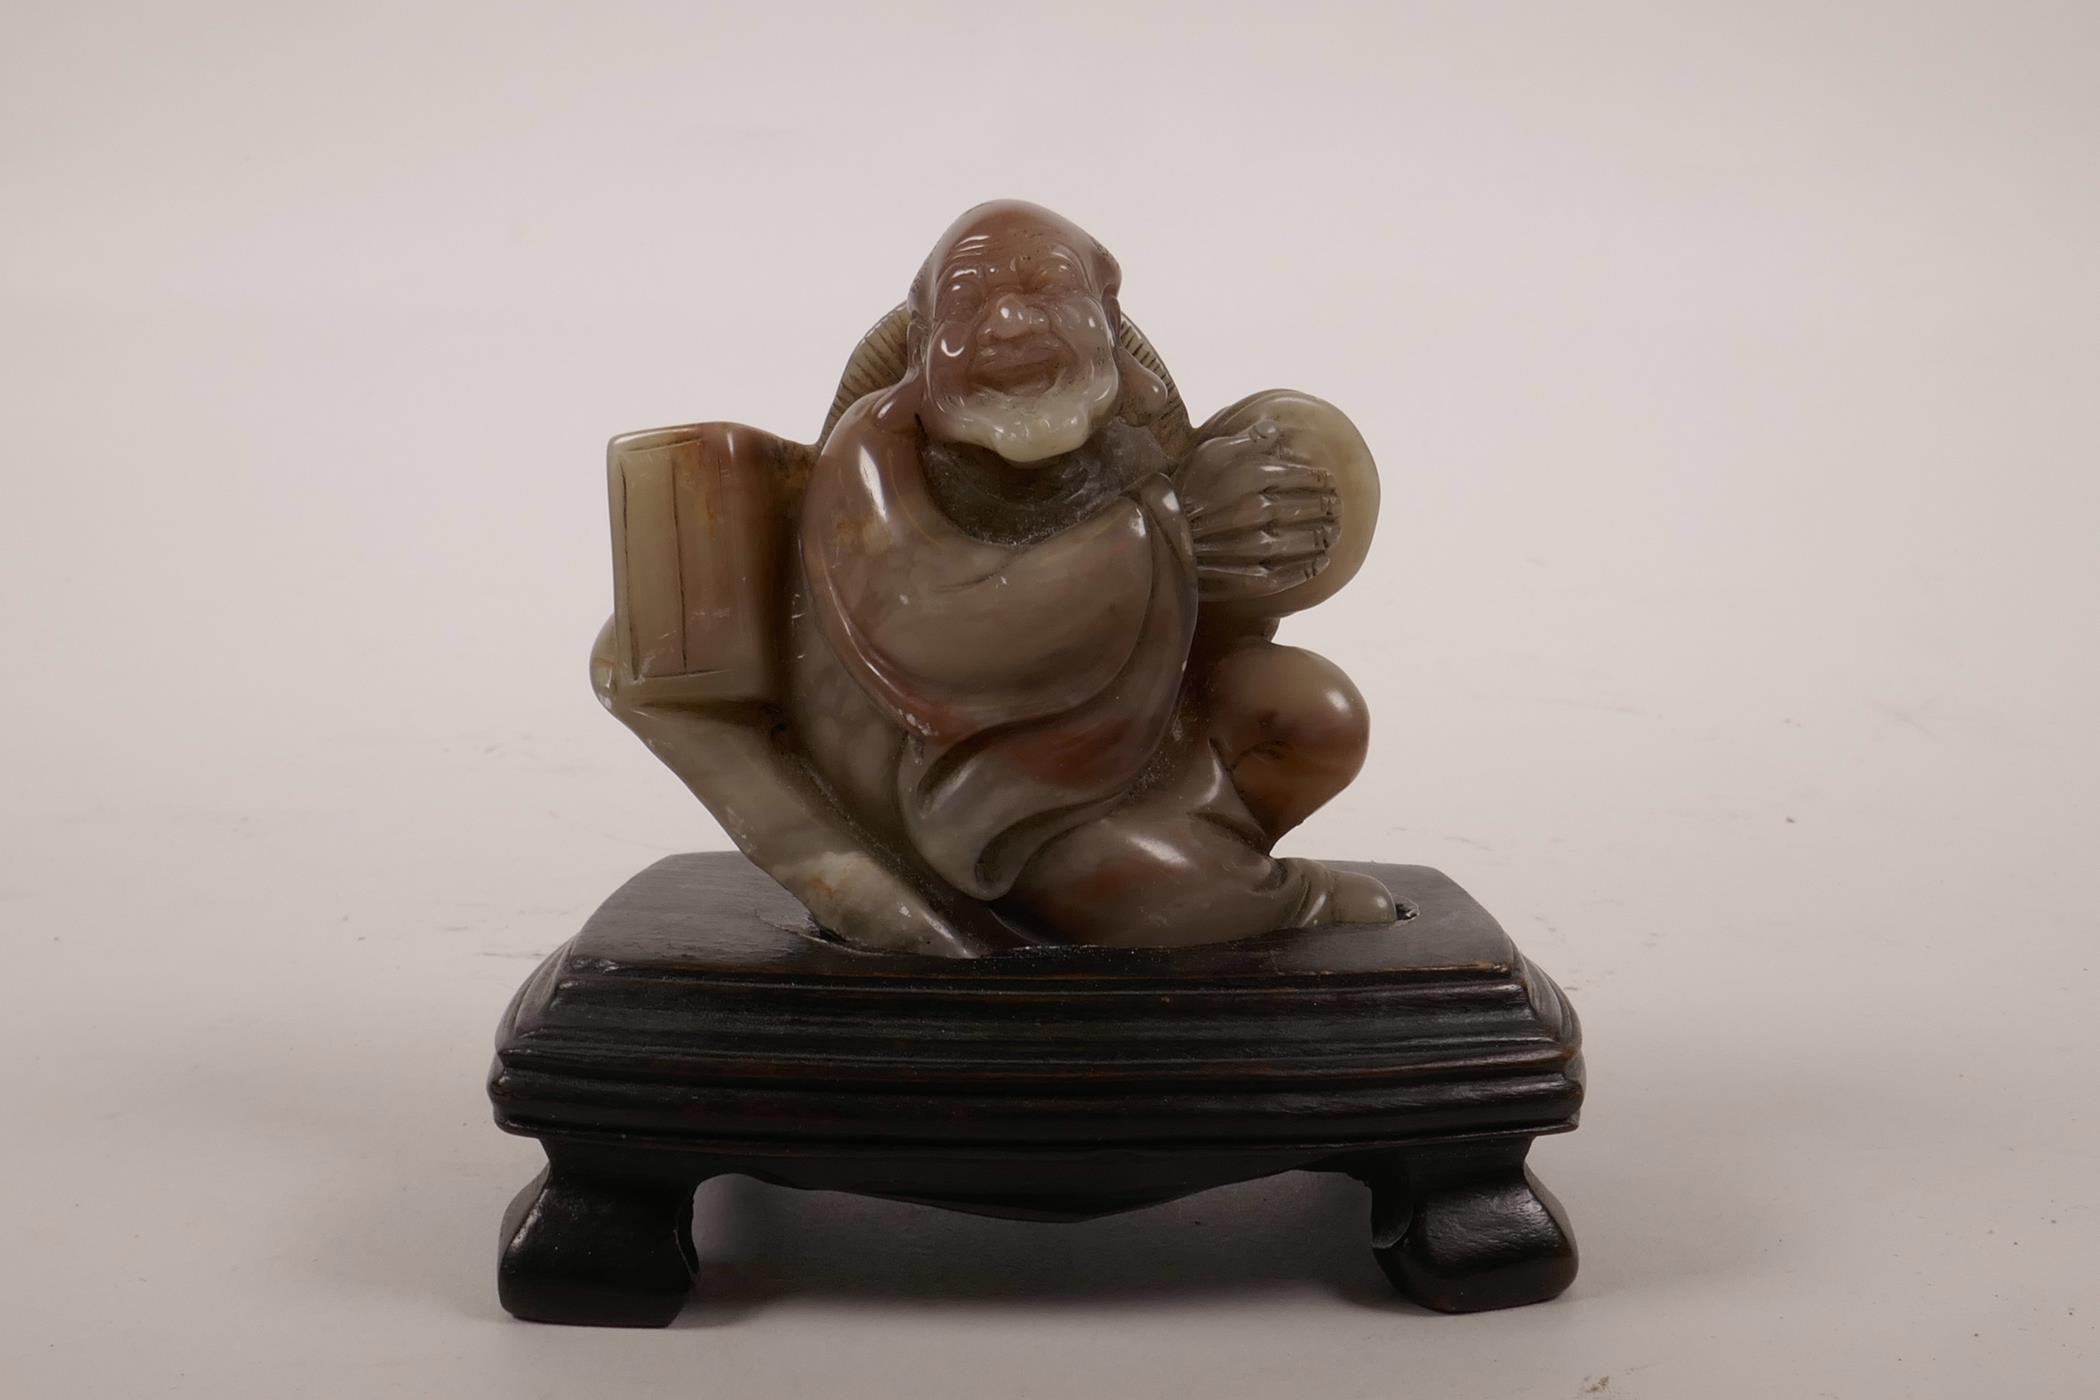 A Chinese soapstone carving of lohan, 4" high